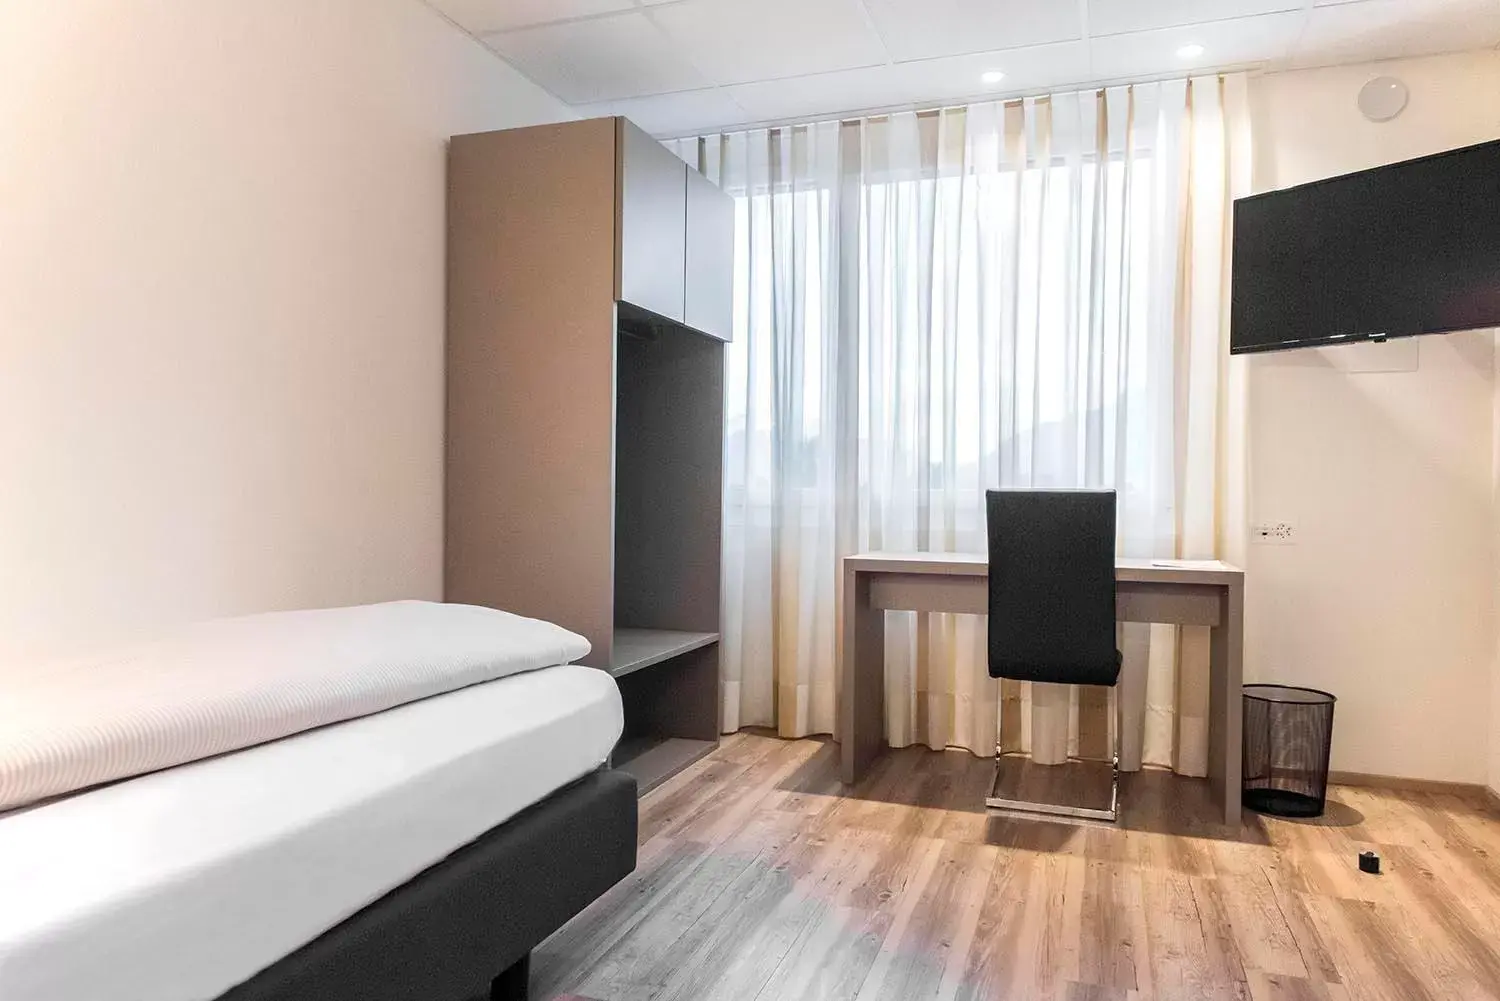 Bedroom, TV/Entertainment Center in Hotel am Kreisel: Self-Service Check-In Hotel